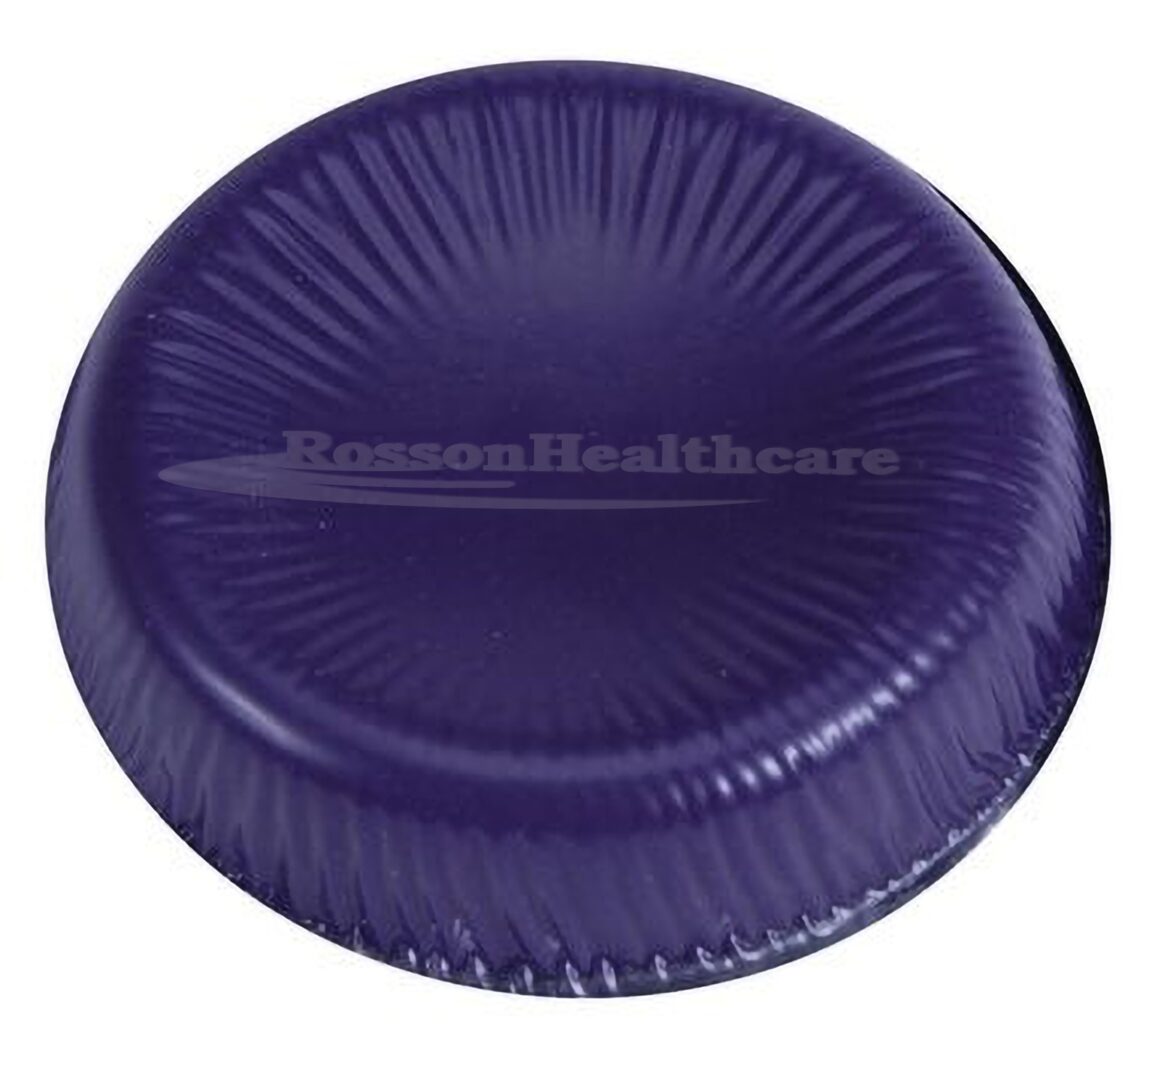 A purple plastic bowl with the words boston healthcare on it.